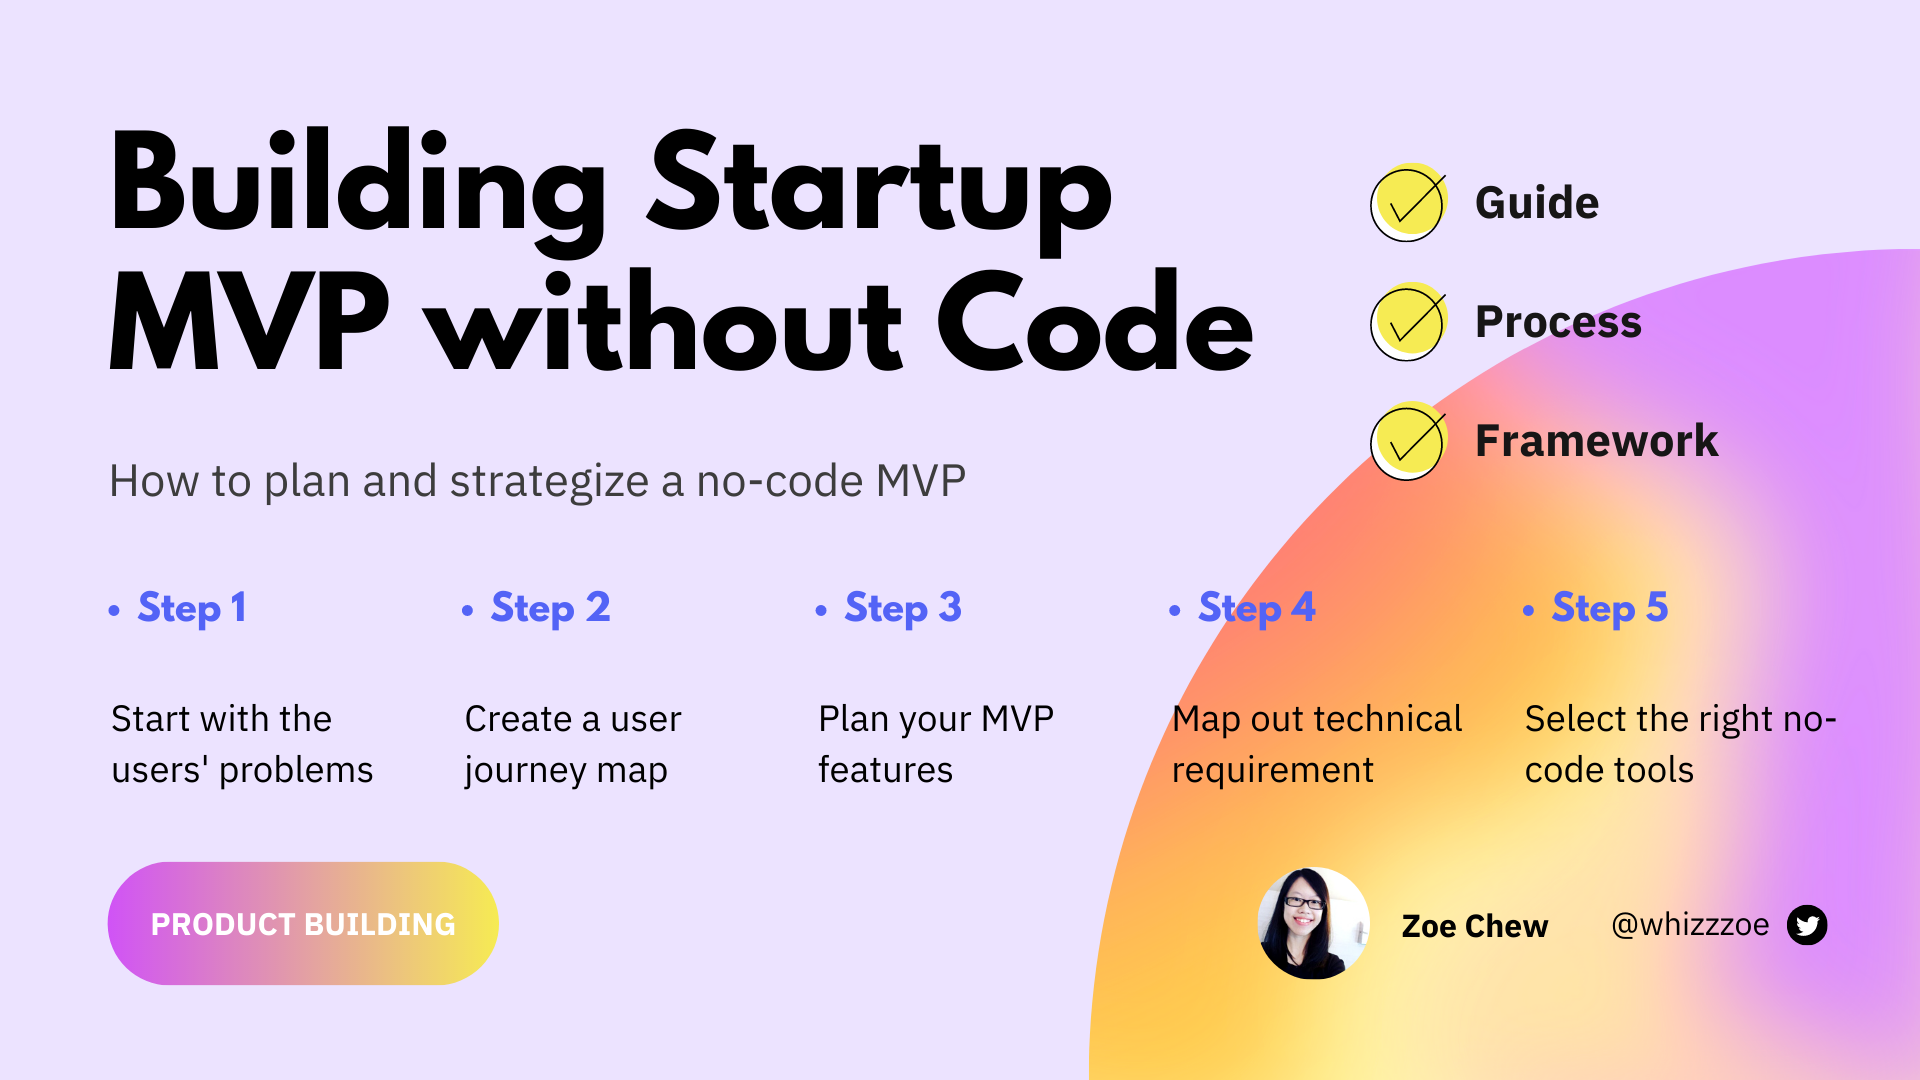 What App Features to Include in a No-Code MVP? (5-Steps to Figure Out!)